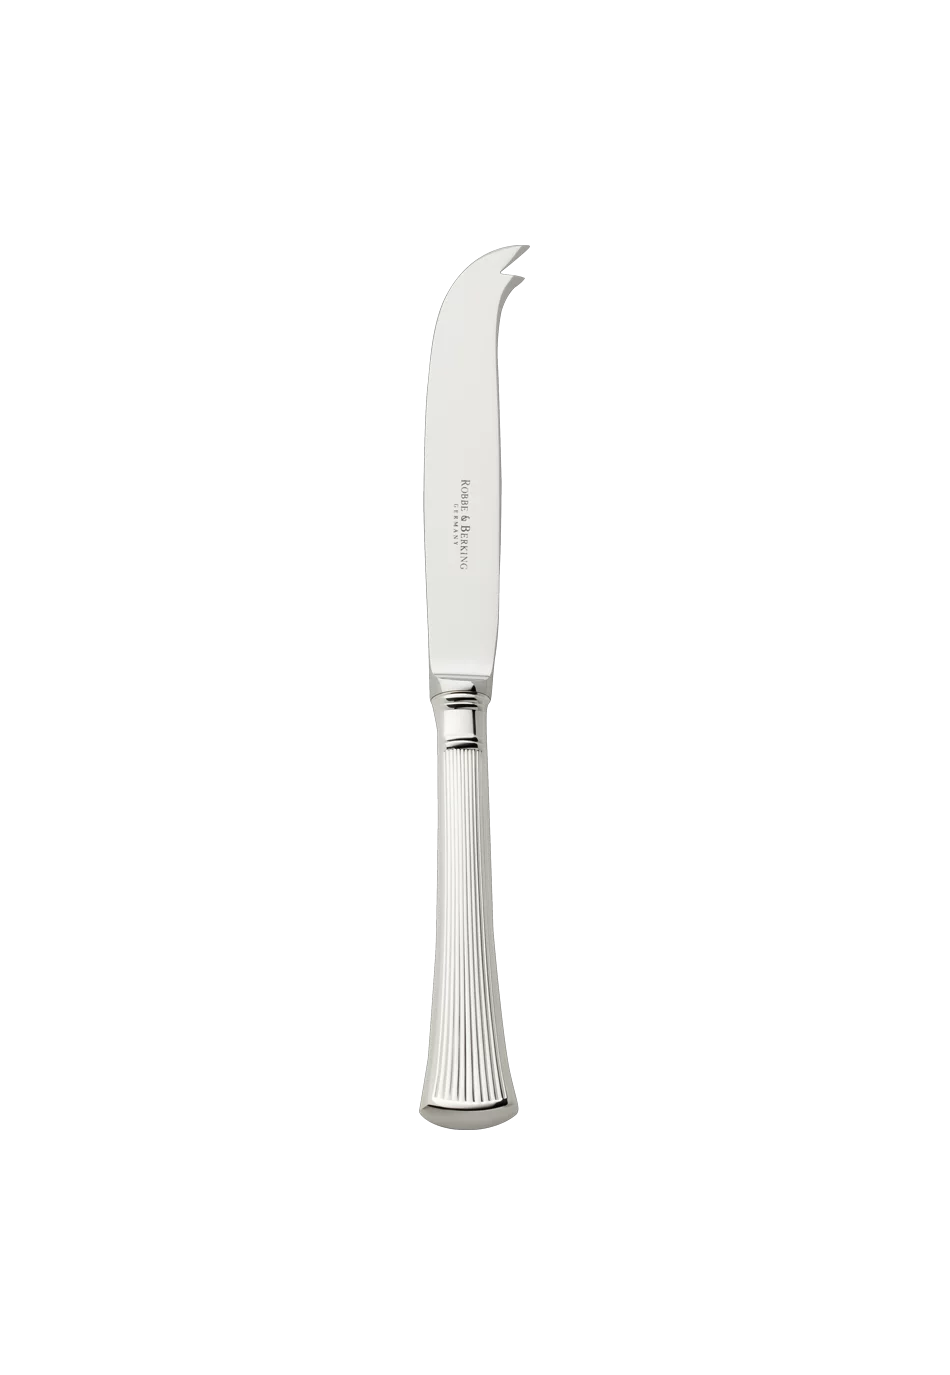 Avenue Cheese Knife (150g massive silverplated)